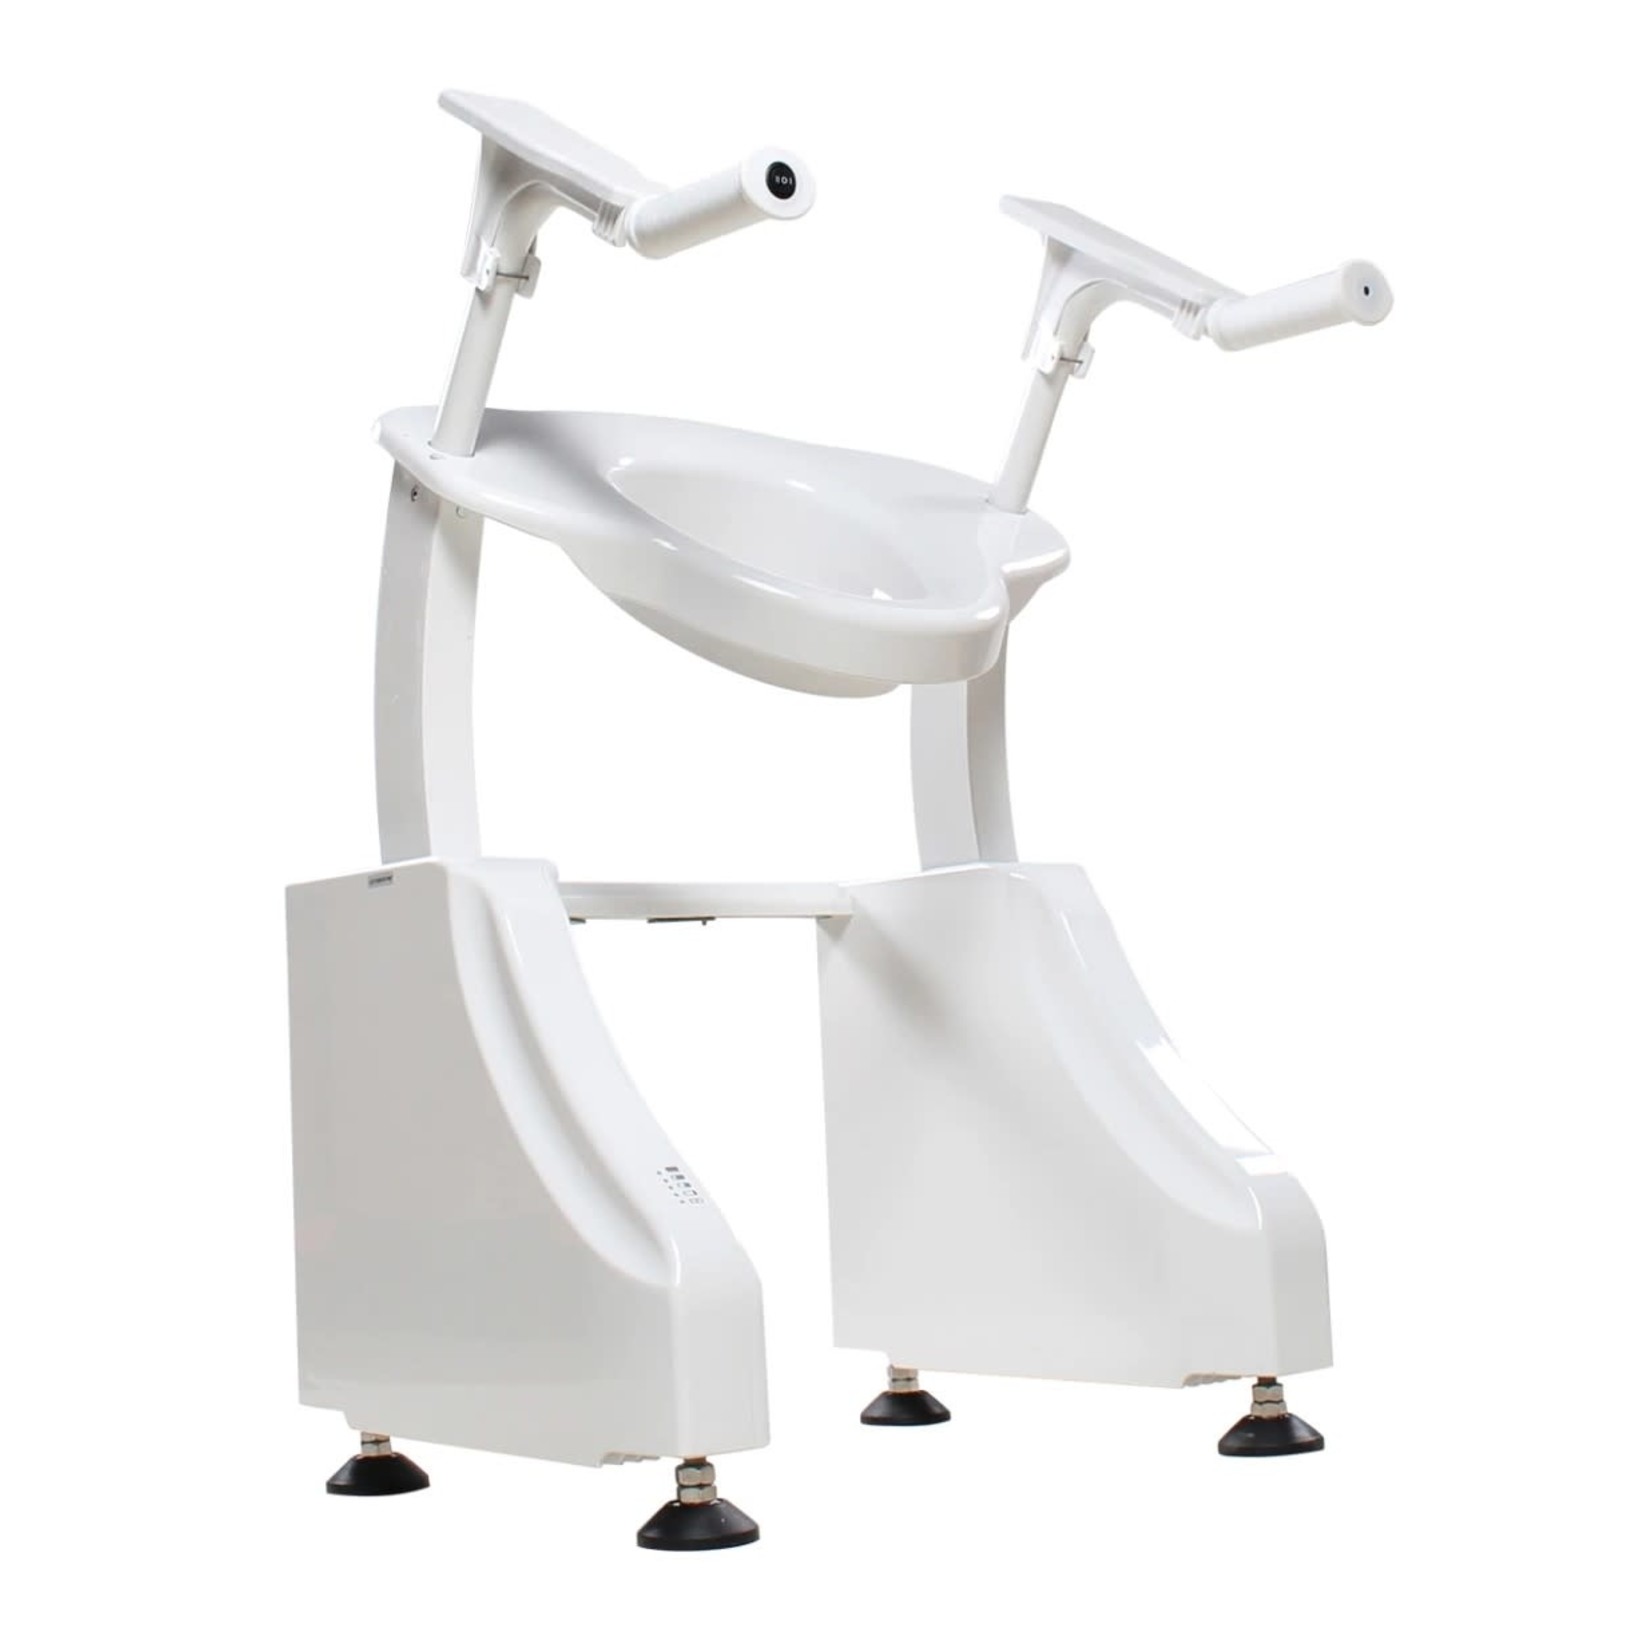 Dignity Lifts Deluxe Toilet Lift - White